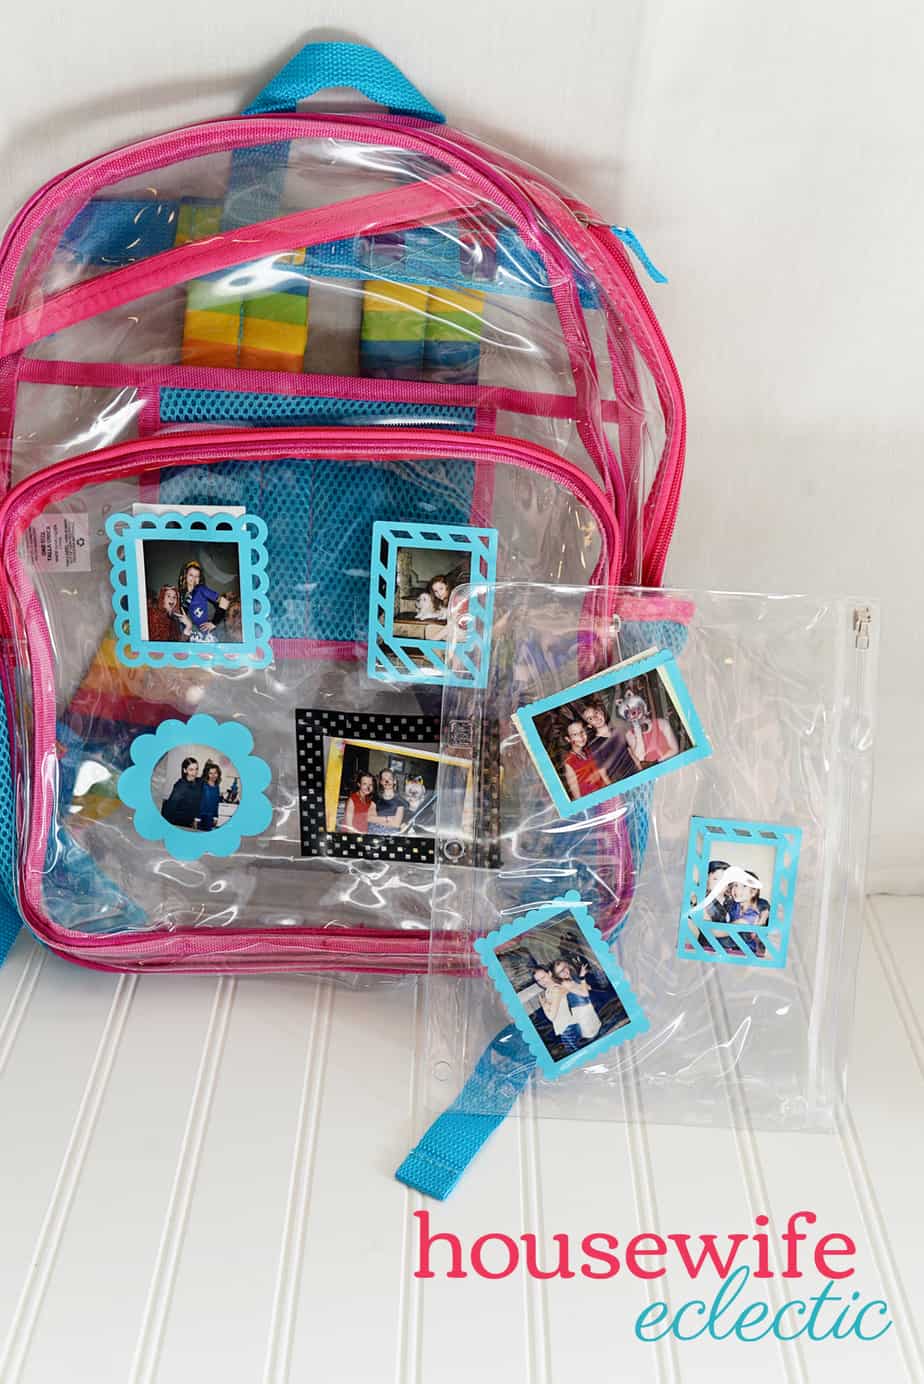 Housewife Eclectic: Instant Photo Frame Backpack 